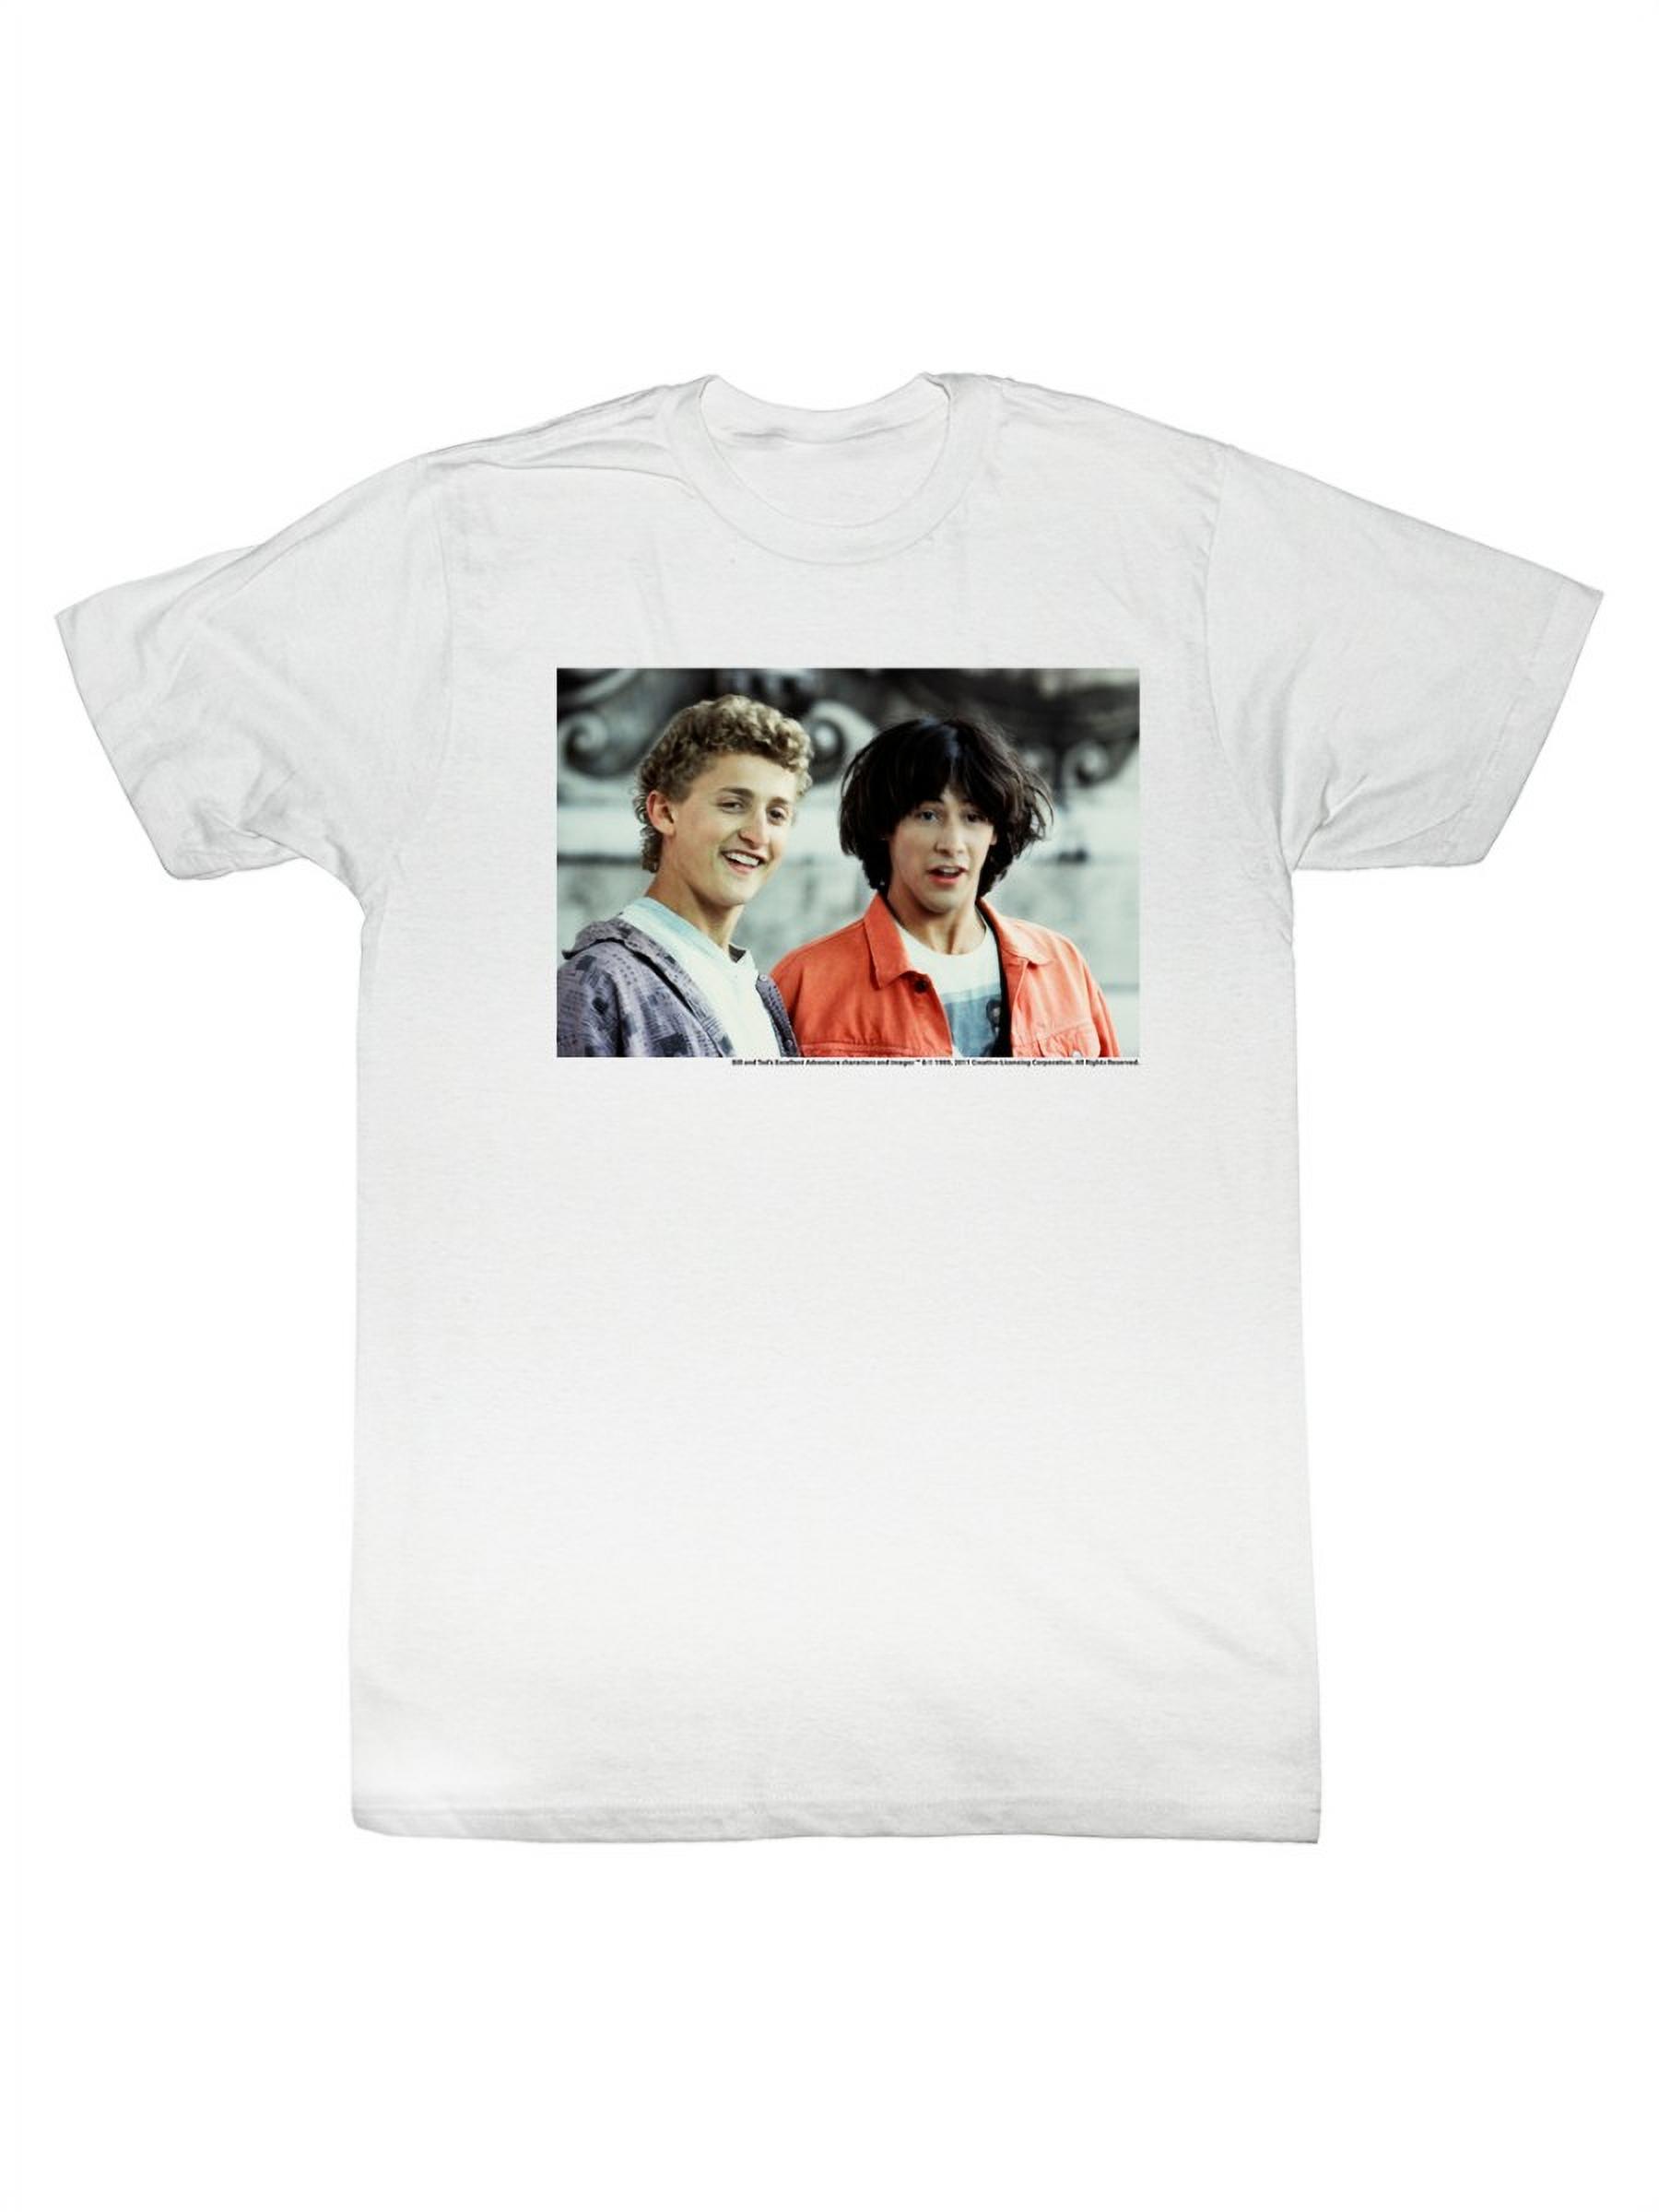 Bill&Ted's Excellent Adventure SciFi Comedy Movie The Dudes Adult T-Shirt - image 1 of 2